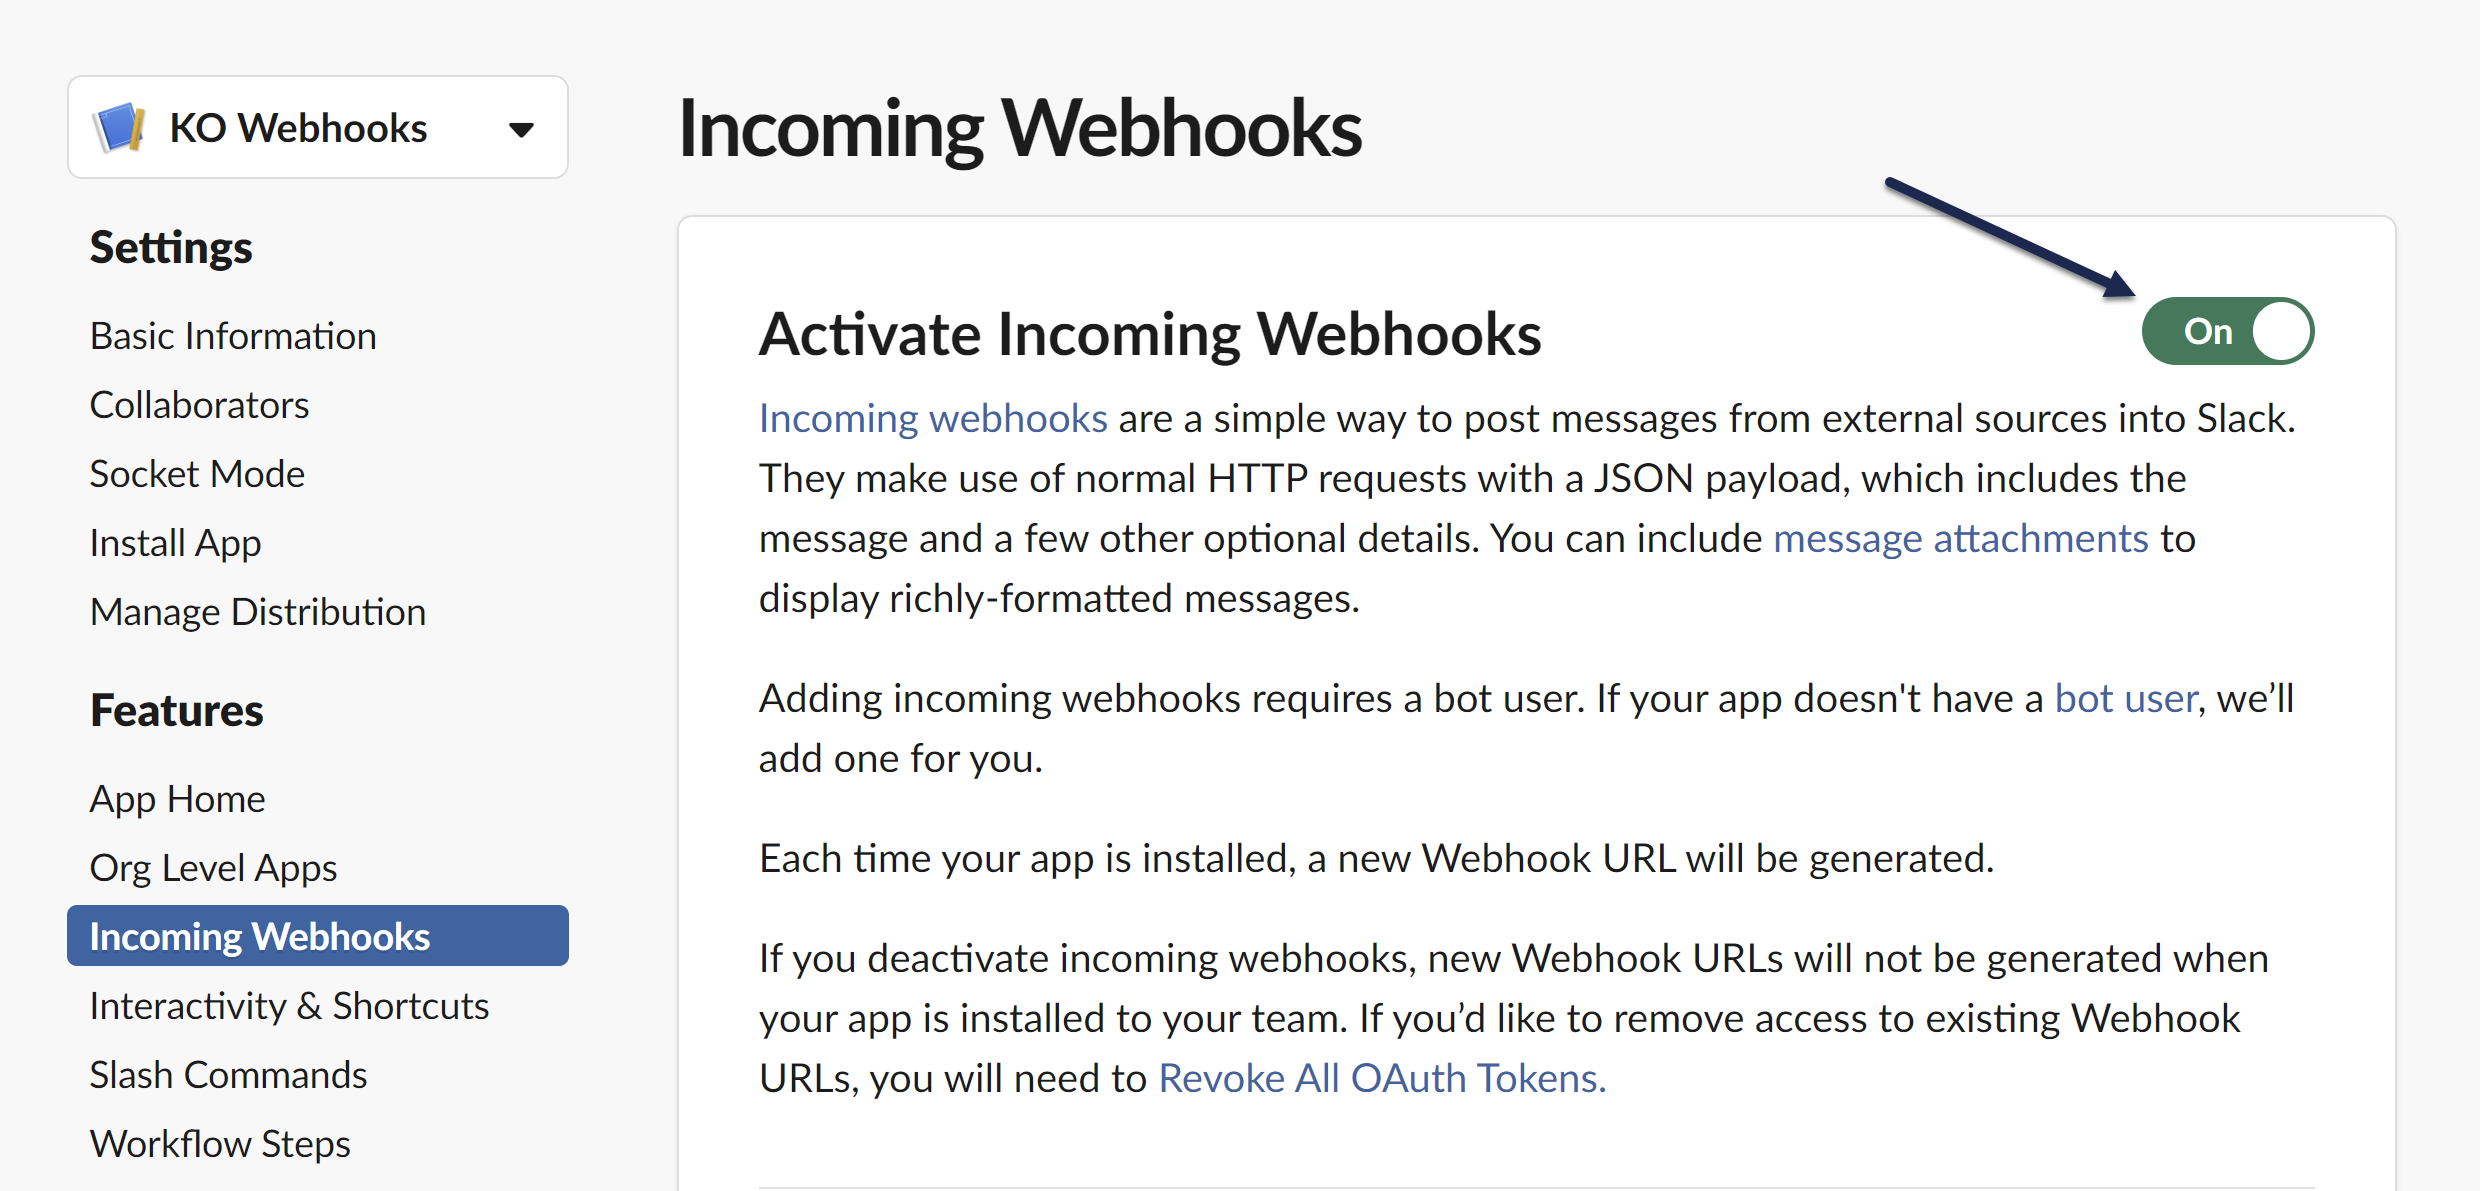 A screenshot of the Incoming Webhooks page of the Slack app with the toggle next to Activate Incoming Webhooks set to 'On'